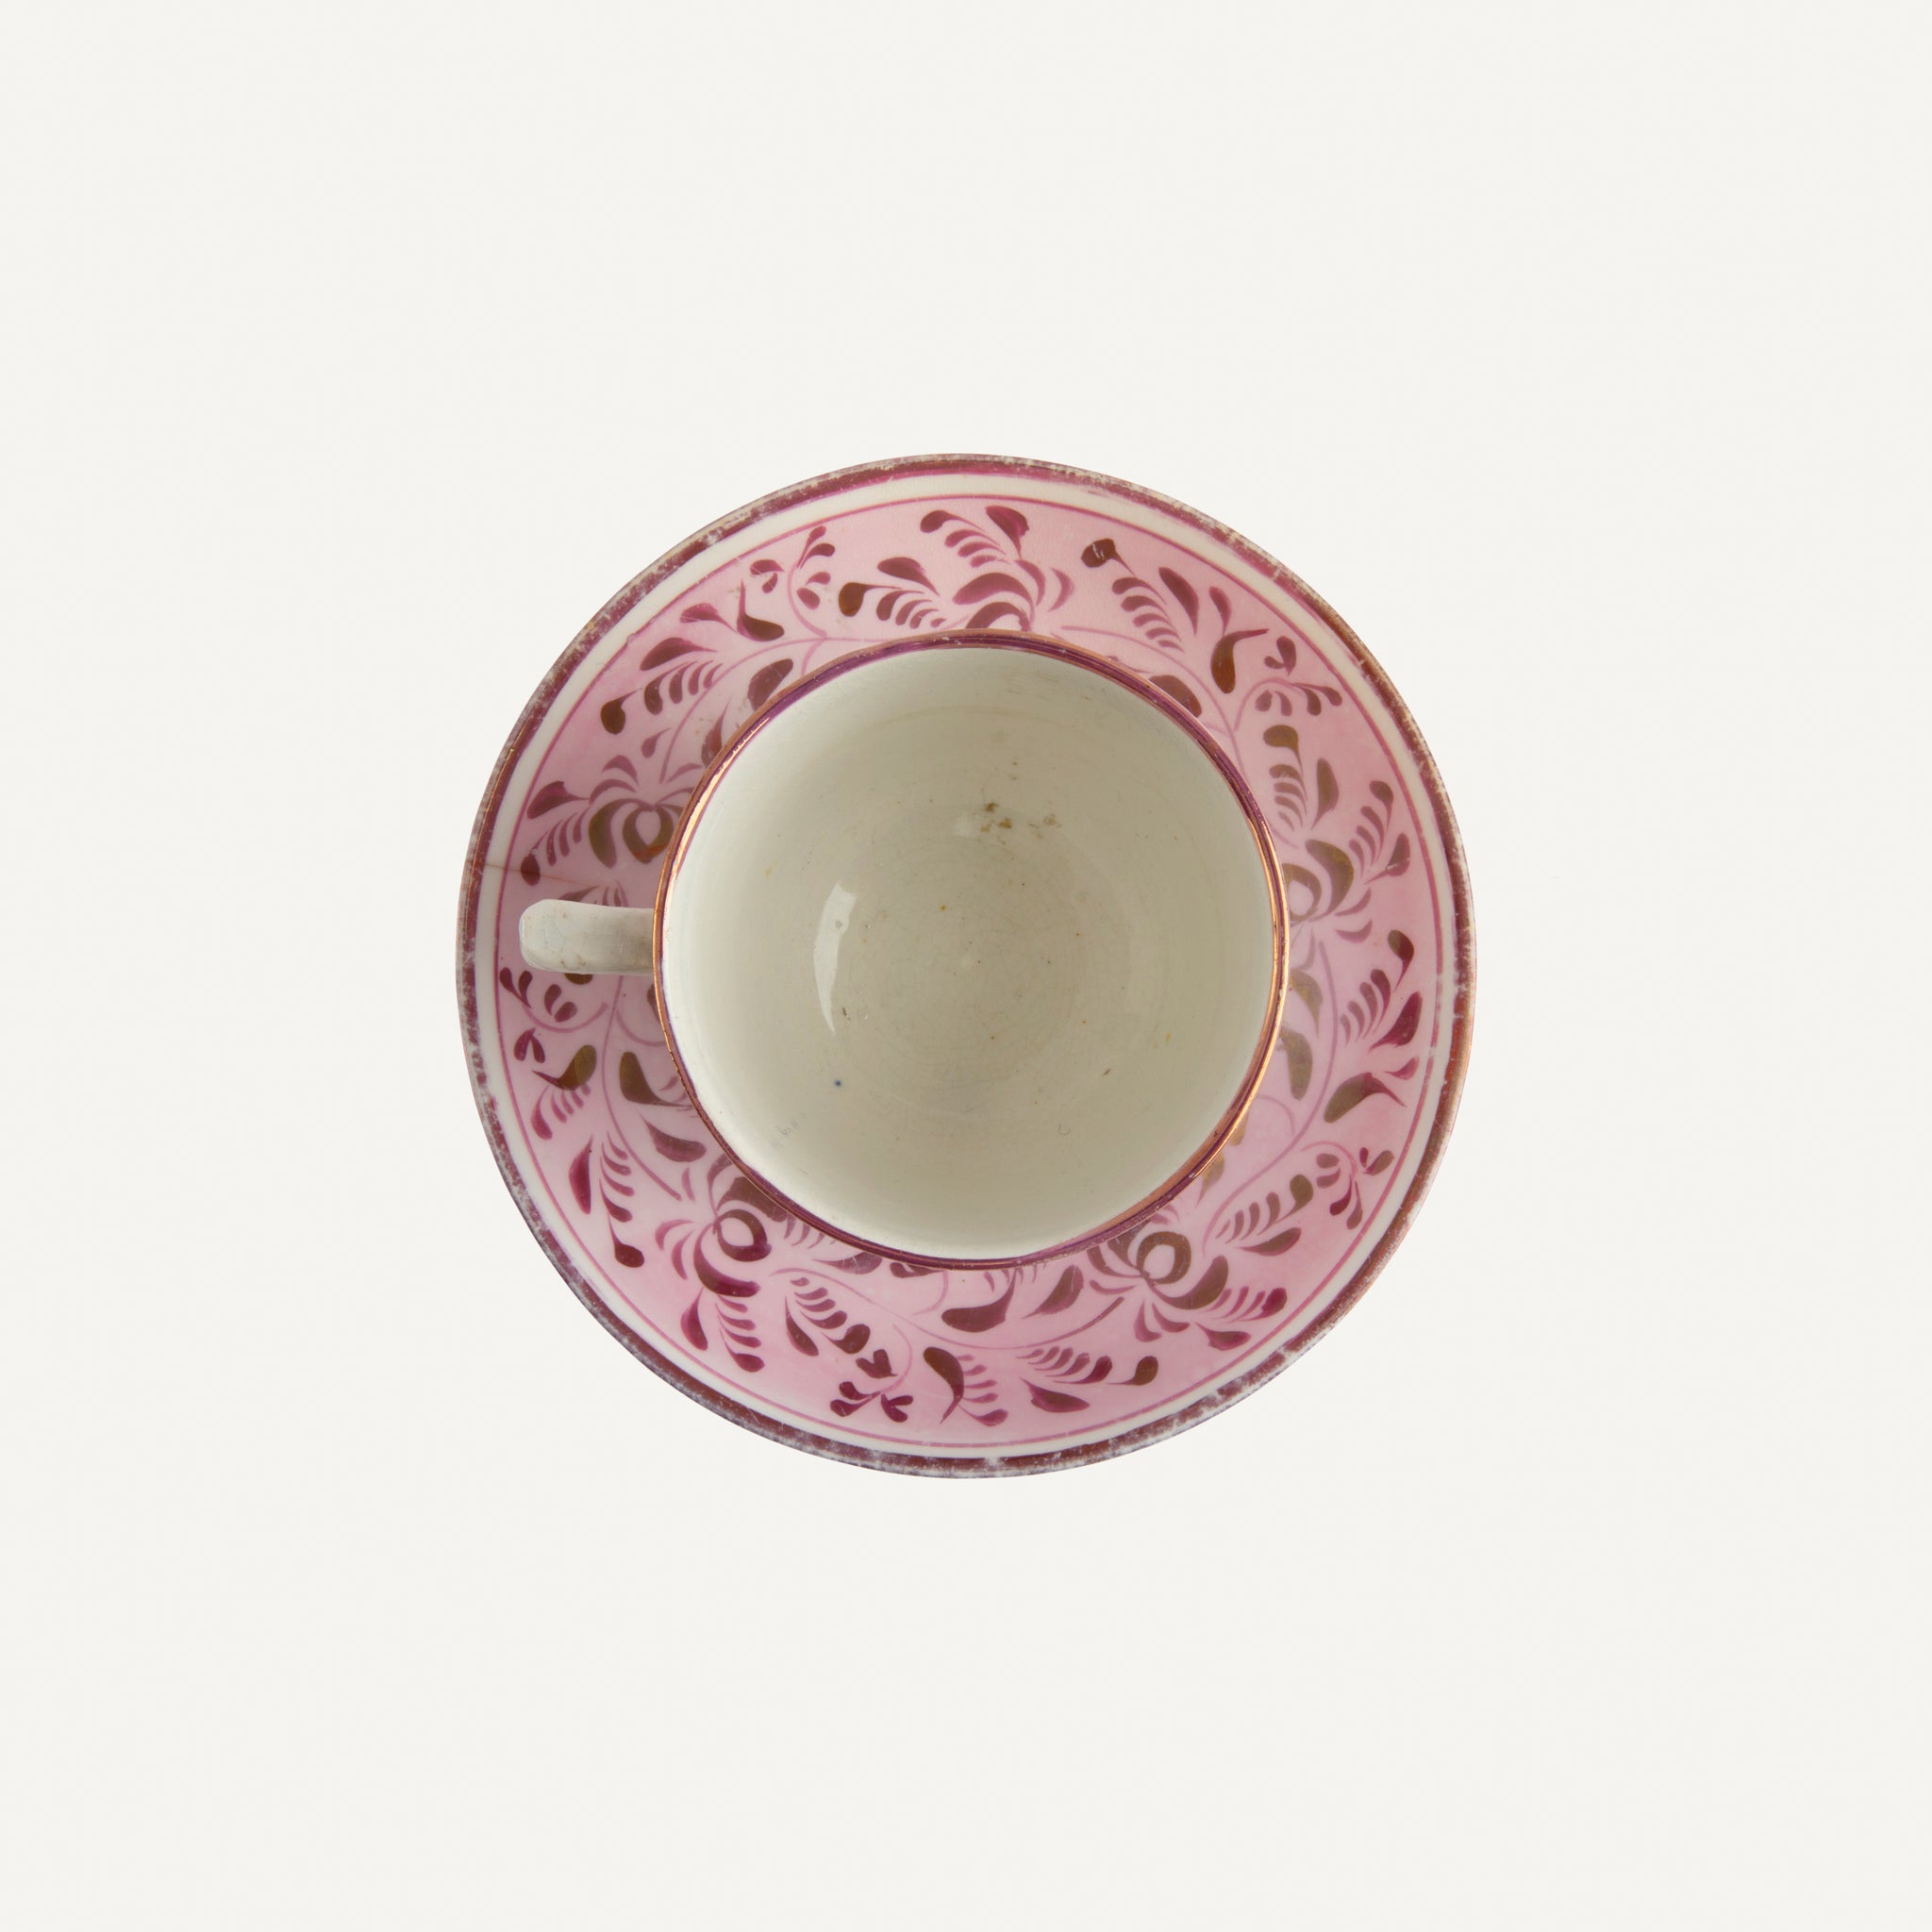 ANTIQUE LUSTREWARE CUP AND SAUCER